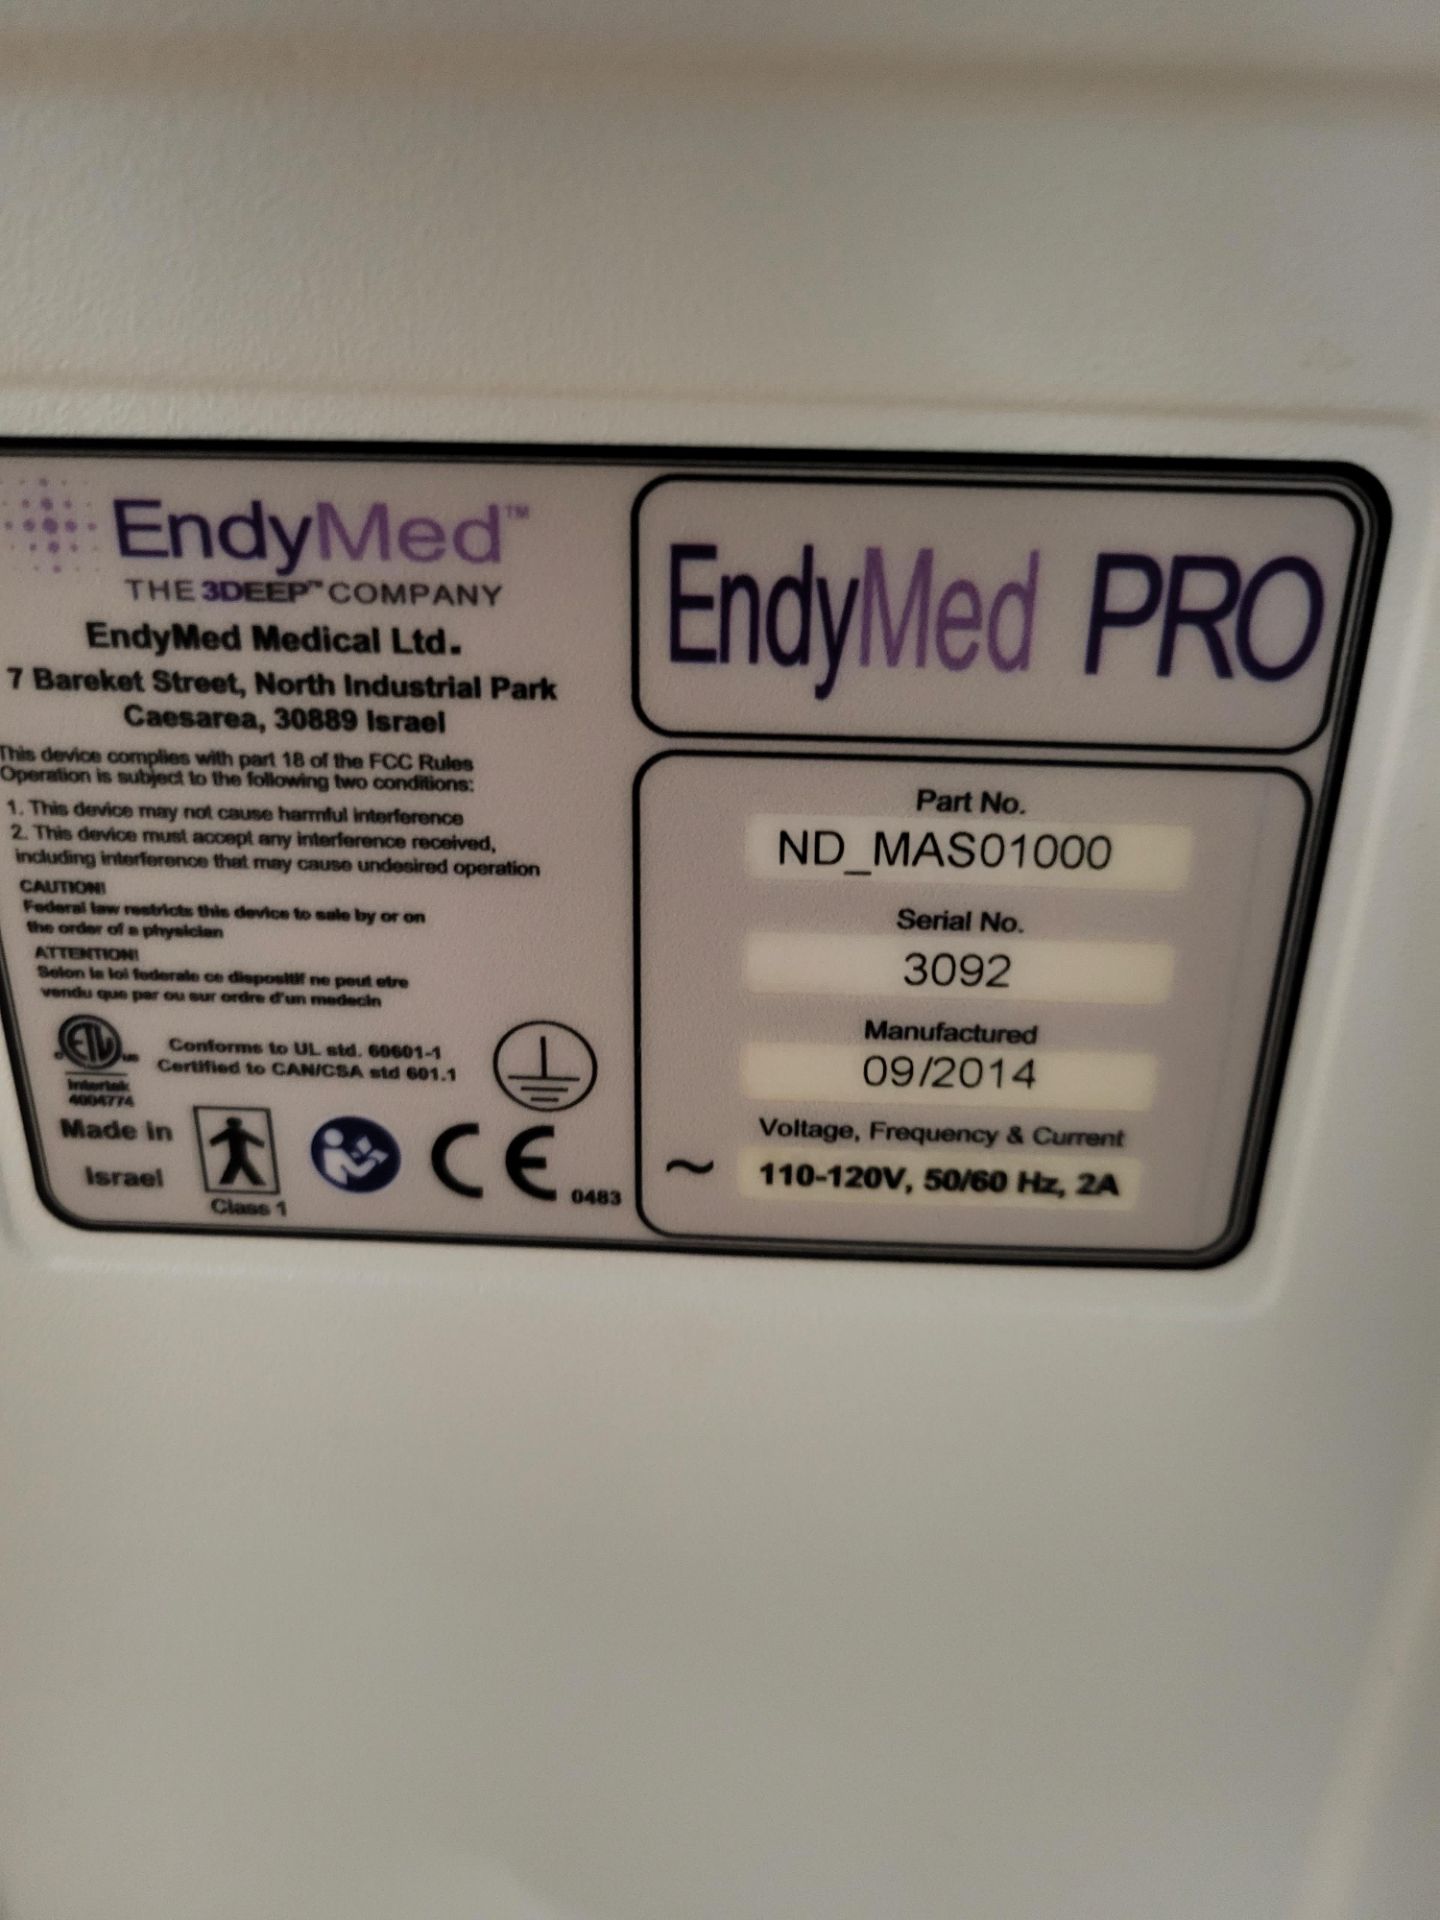 ENDYMED mod. EndyMed Pro RF Treatment Machine, All-in-one with 3Deep Technology - Image 4 of 4